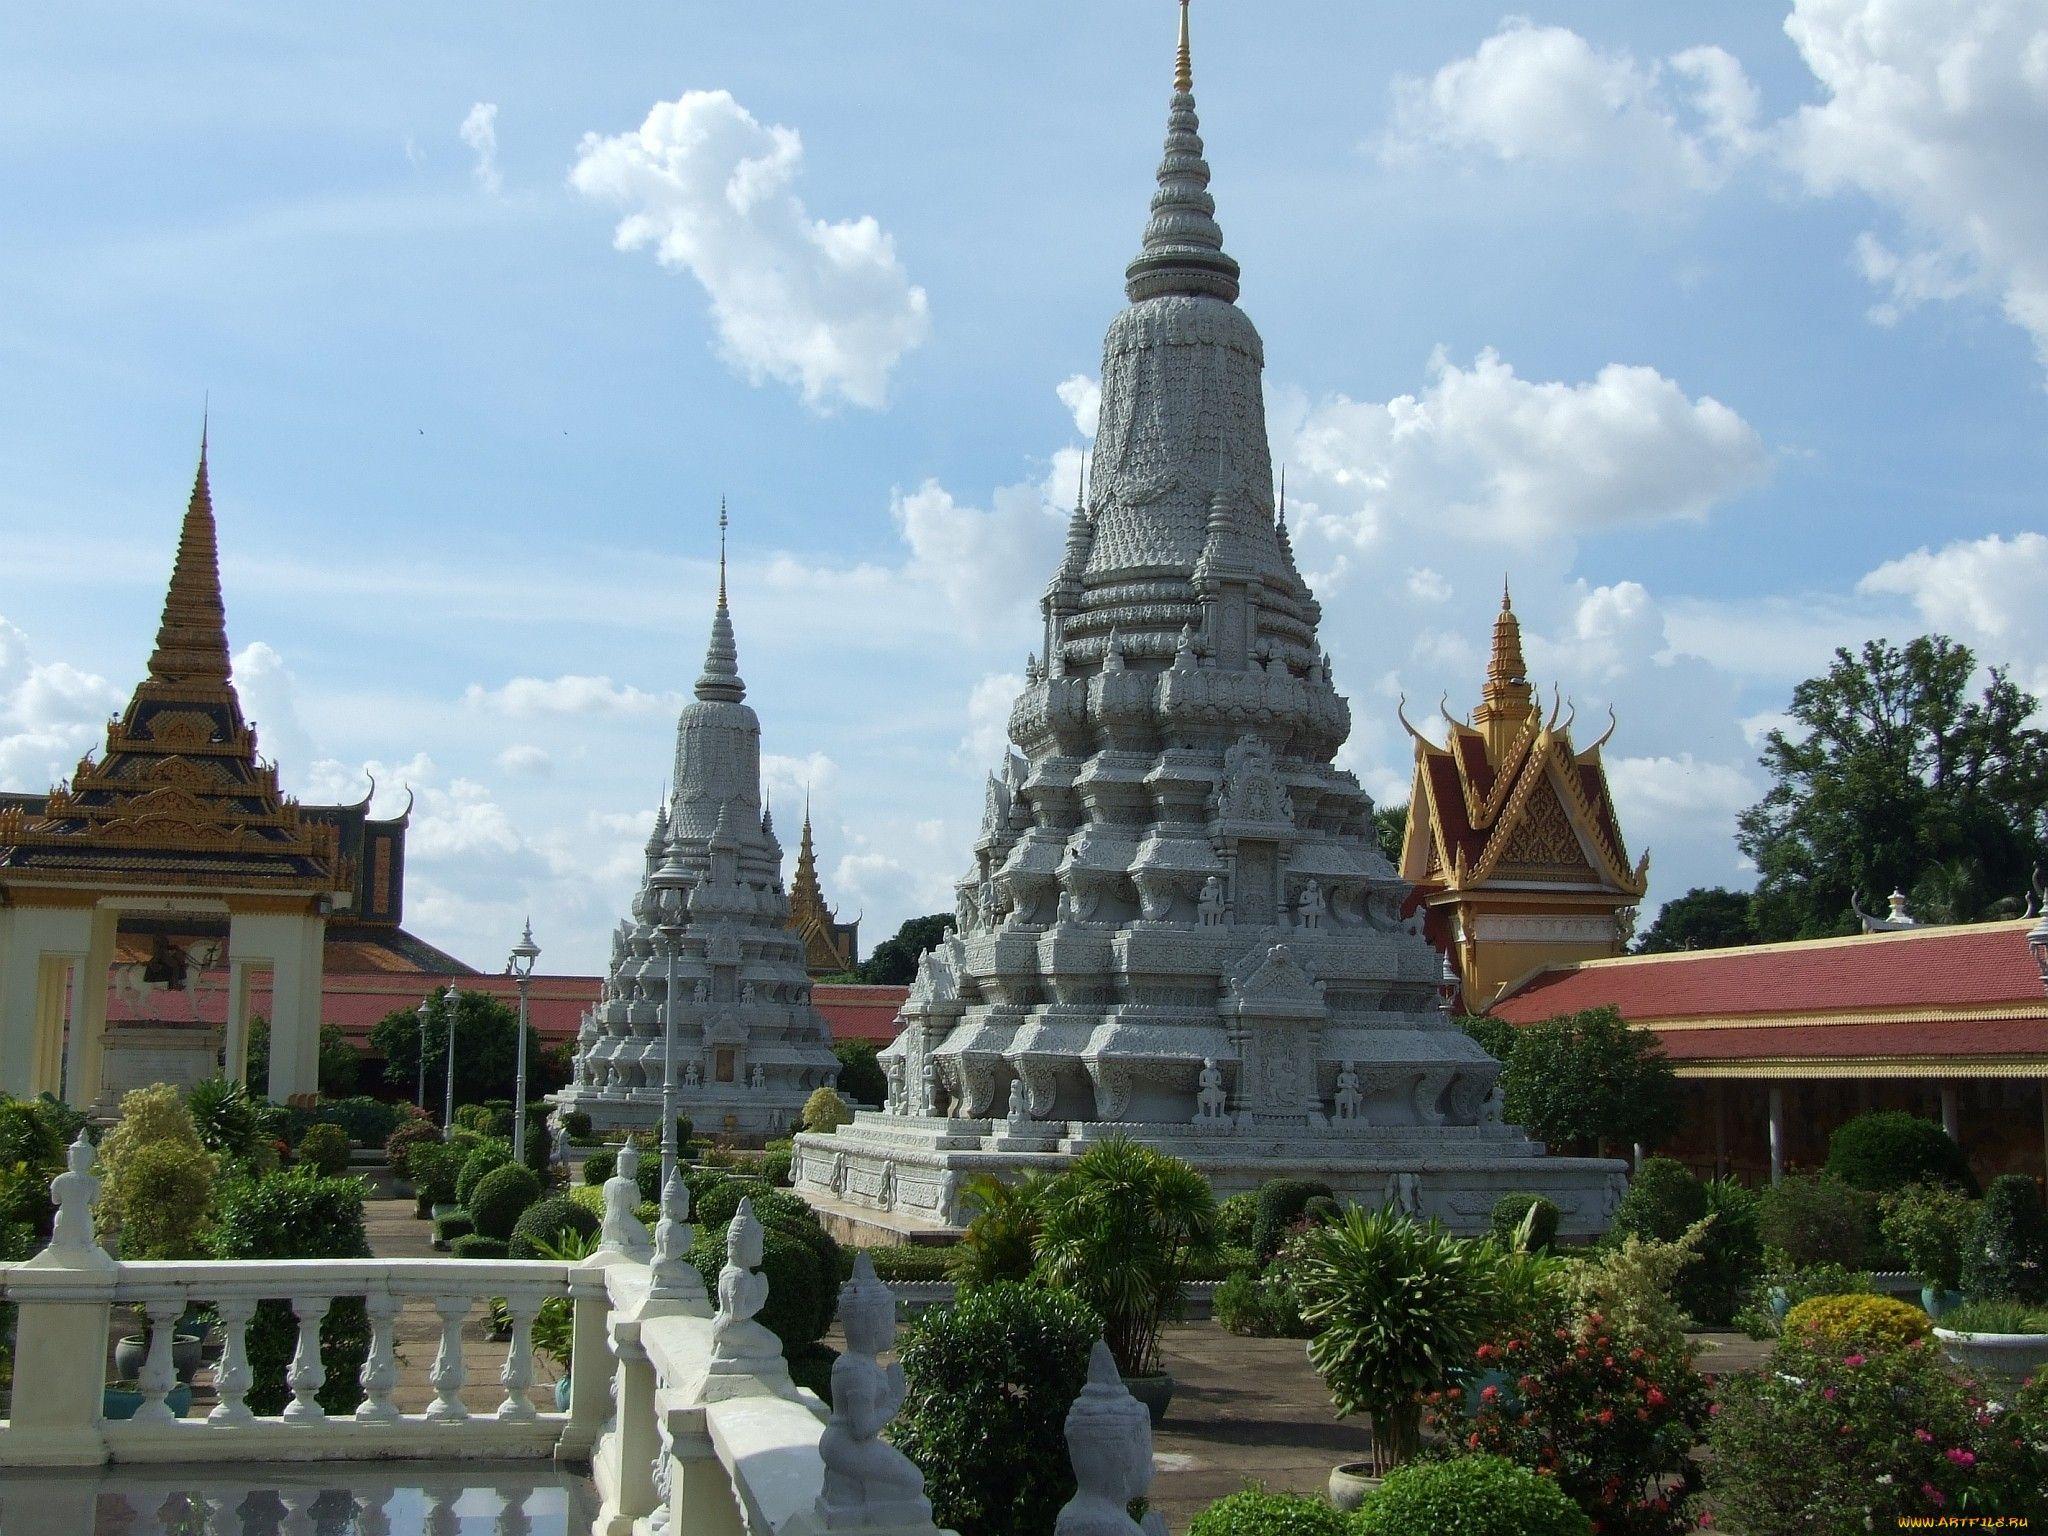 One of stupas at the Royal Palace in Phnom Penh, Cambodia